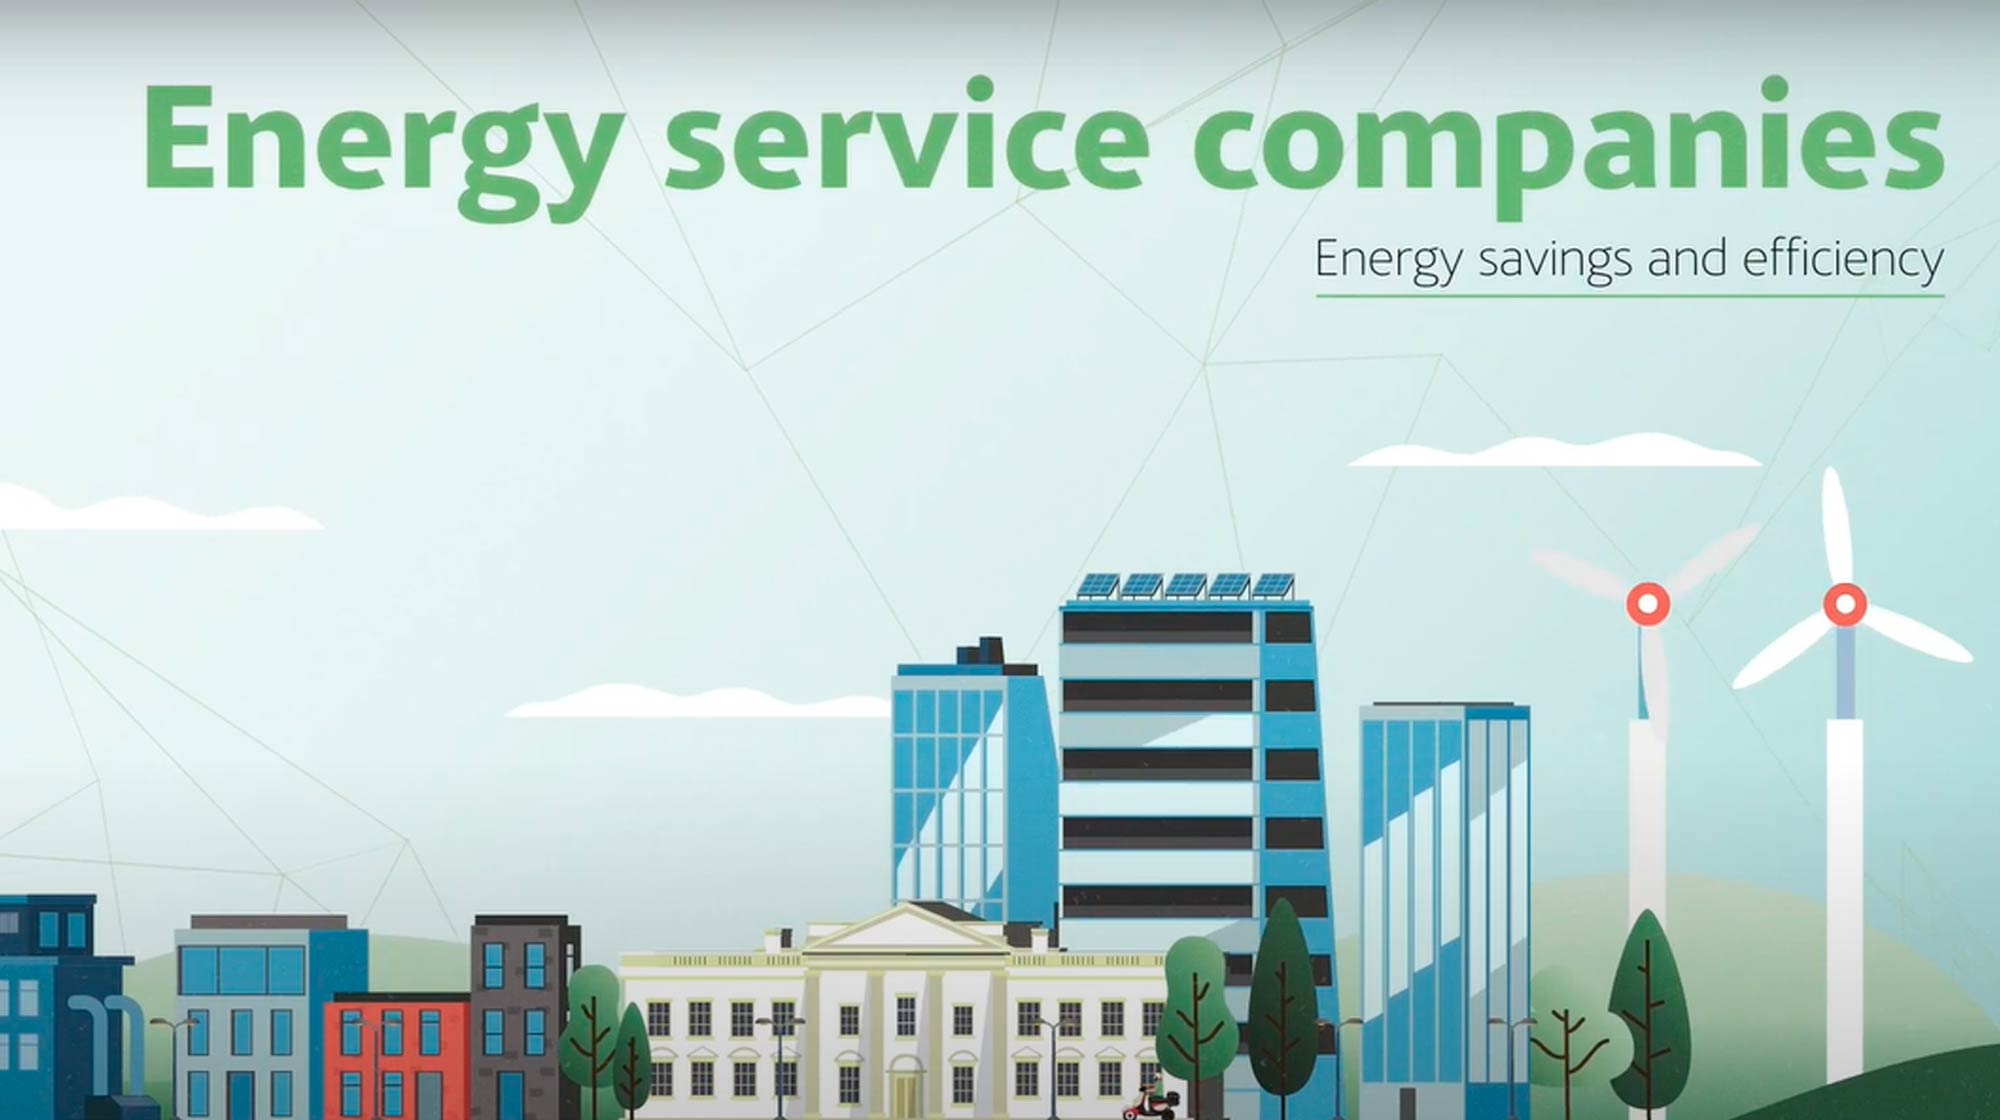 What are energy service companies?